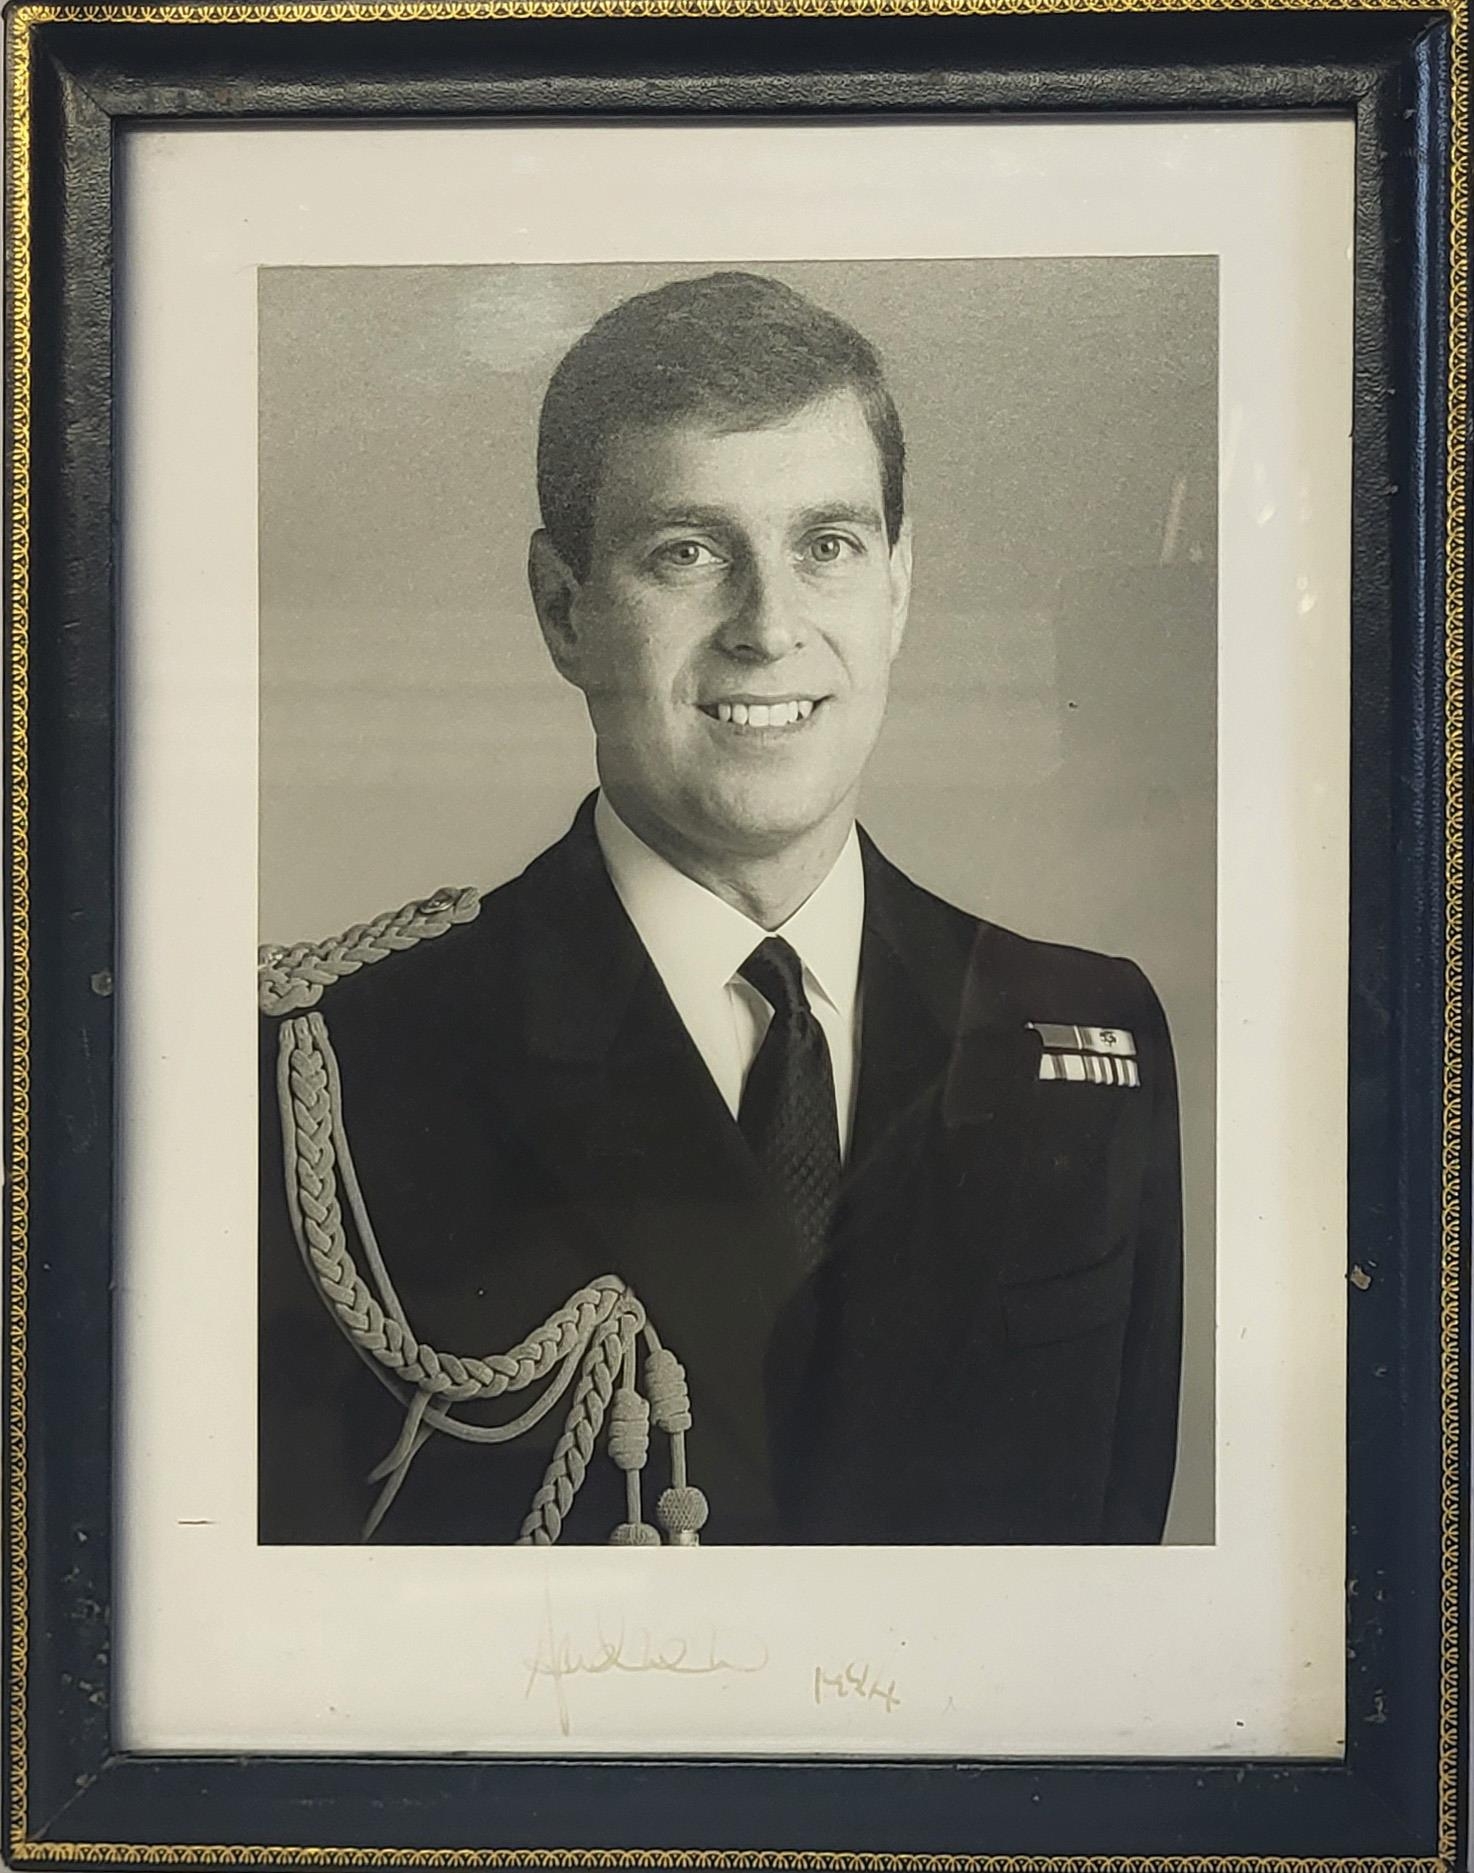 PRINCE ANDREW, DUKE OF YORK, BLACK AND WHITE PHOTOGRAPH OF A BRITISH NAVAL OFFICER Signed in - Image 2 of 3